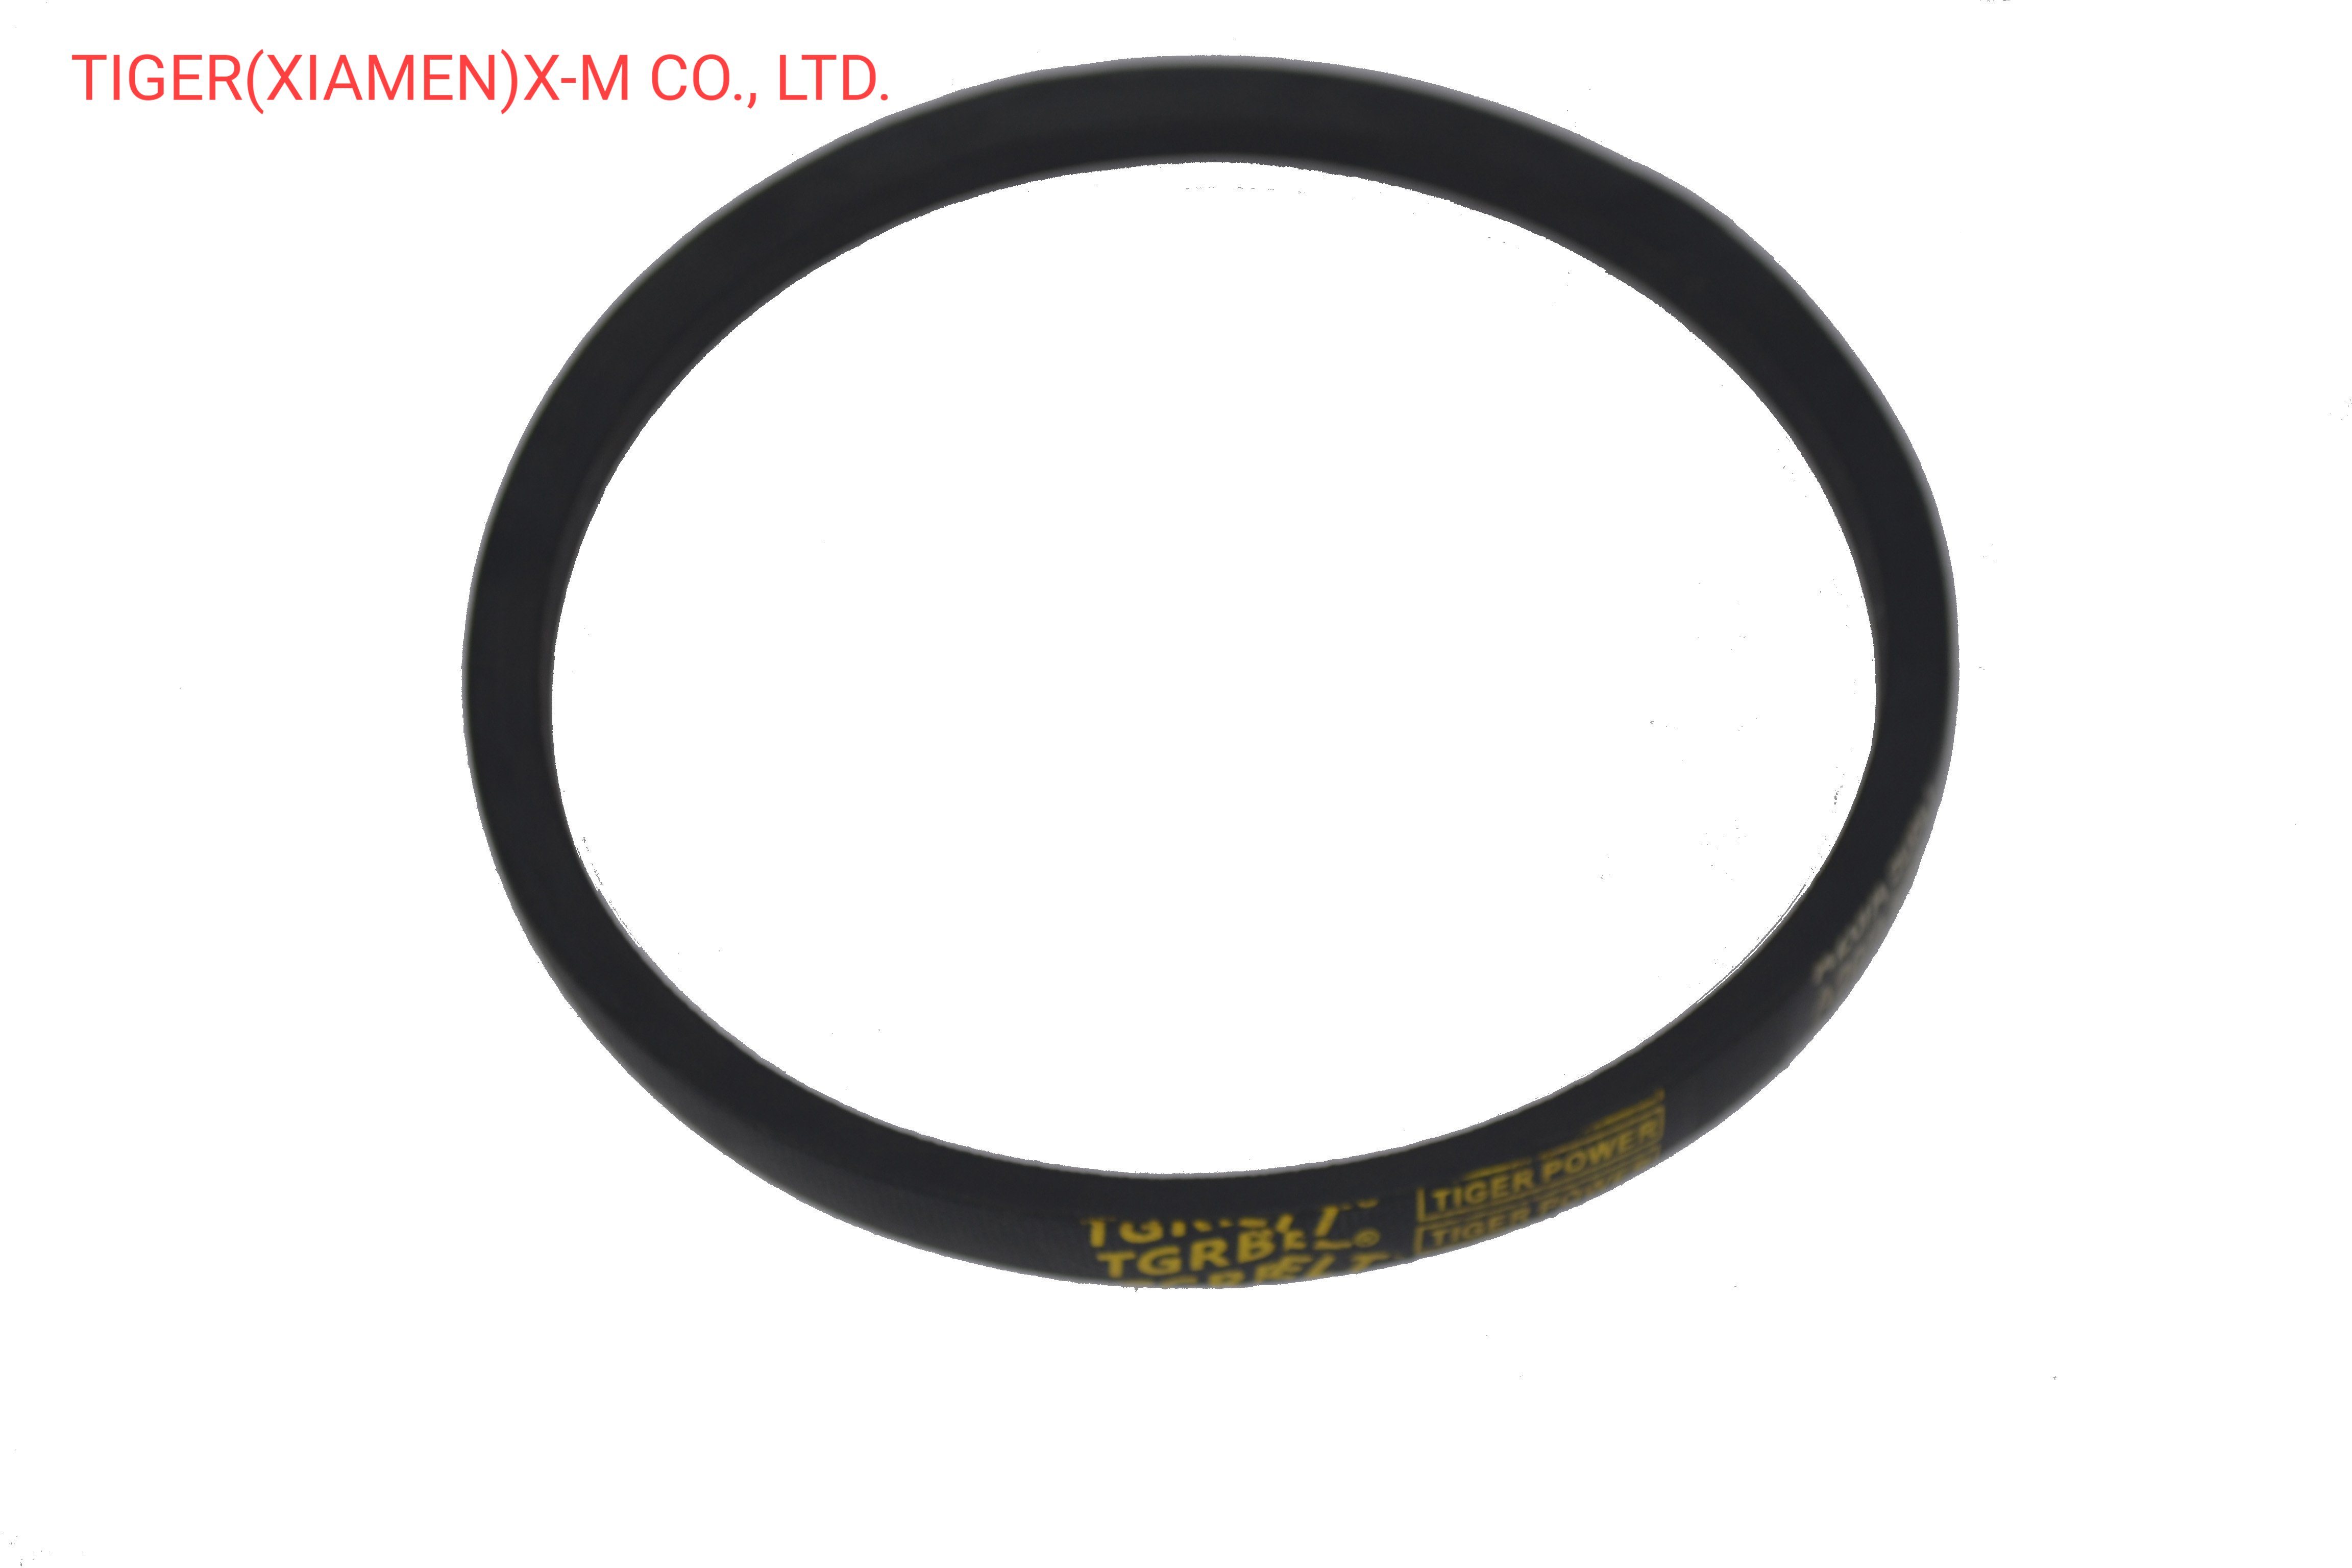 Highquality-Classical-Rubber-Vbelt-A20-From-Factory (3)